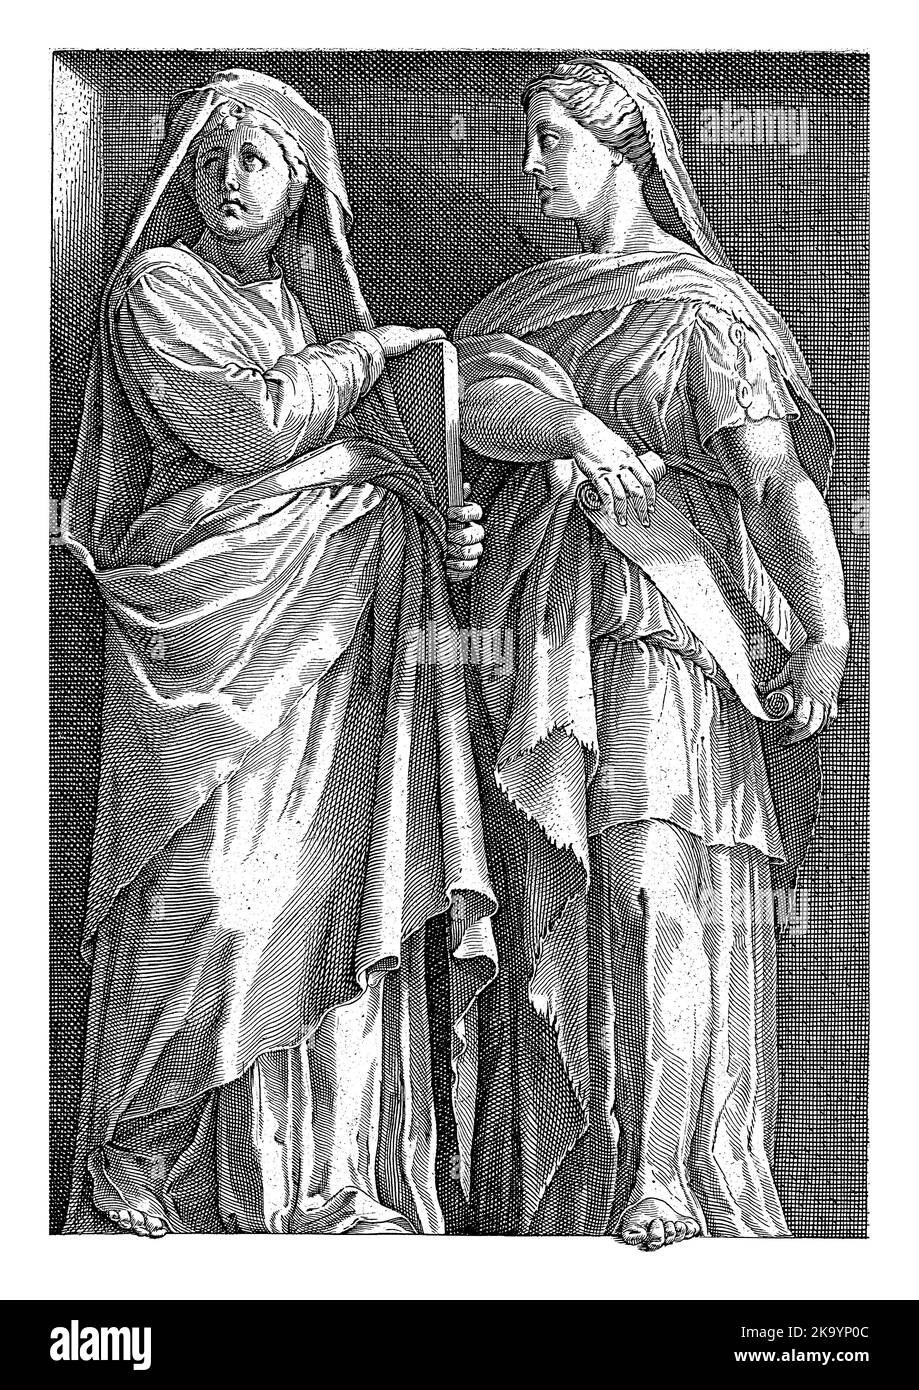 Two sibyls, one holding a book or tablet, the other holding a scroll. Below the performance a two-line text in Latin. Stock Photo